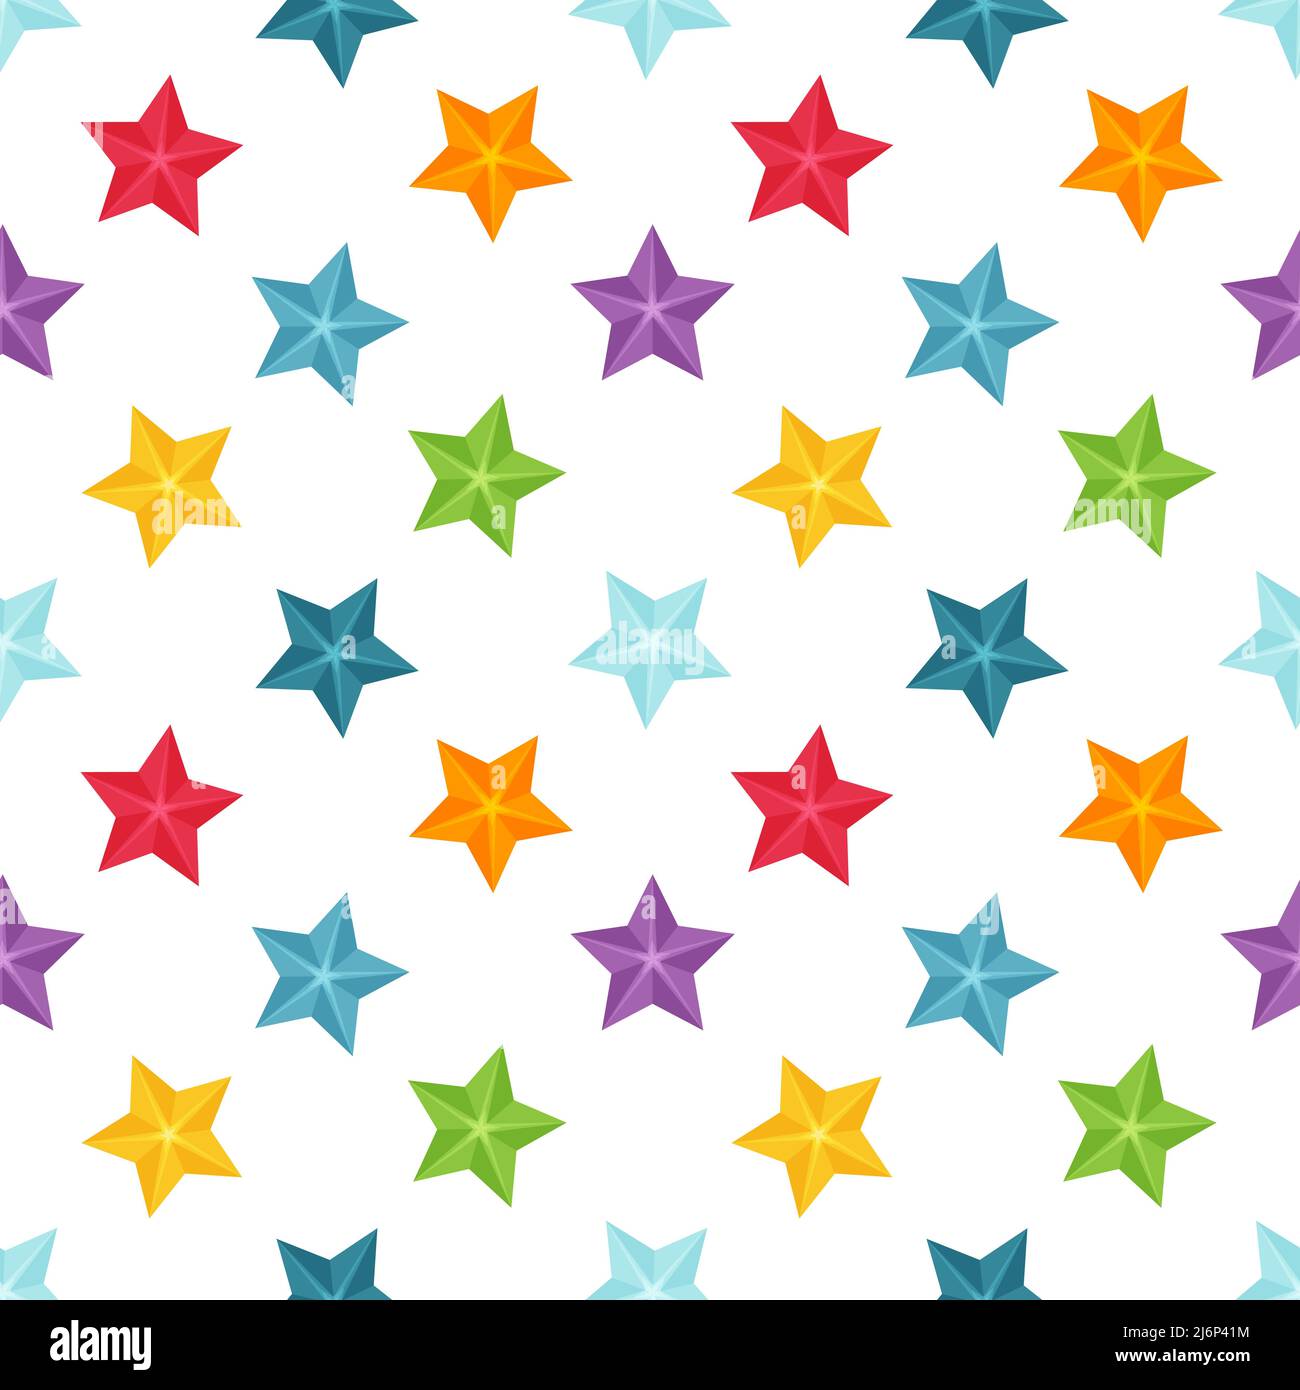 Bright seamless pattern with multi-colored stars on a white background. Great for wrapping paper, gift boxes, fabric. Flat-style objects are isolated Stock Vector